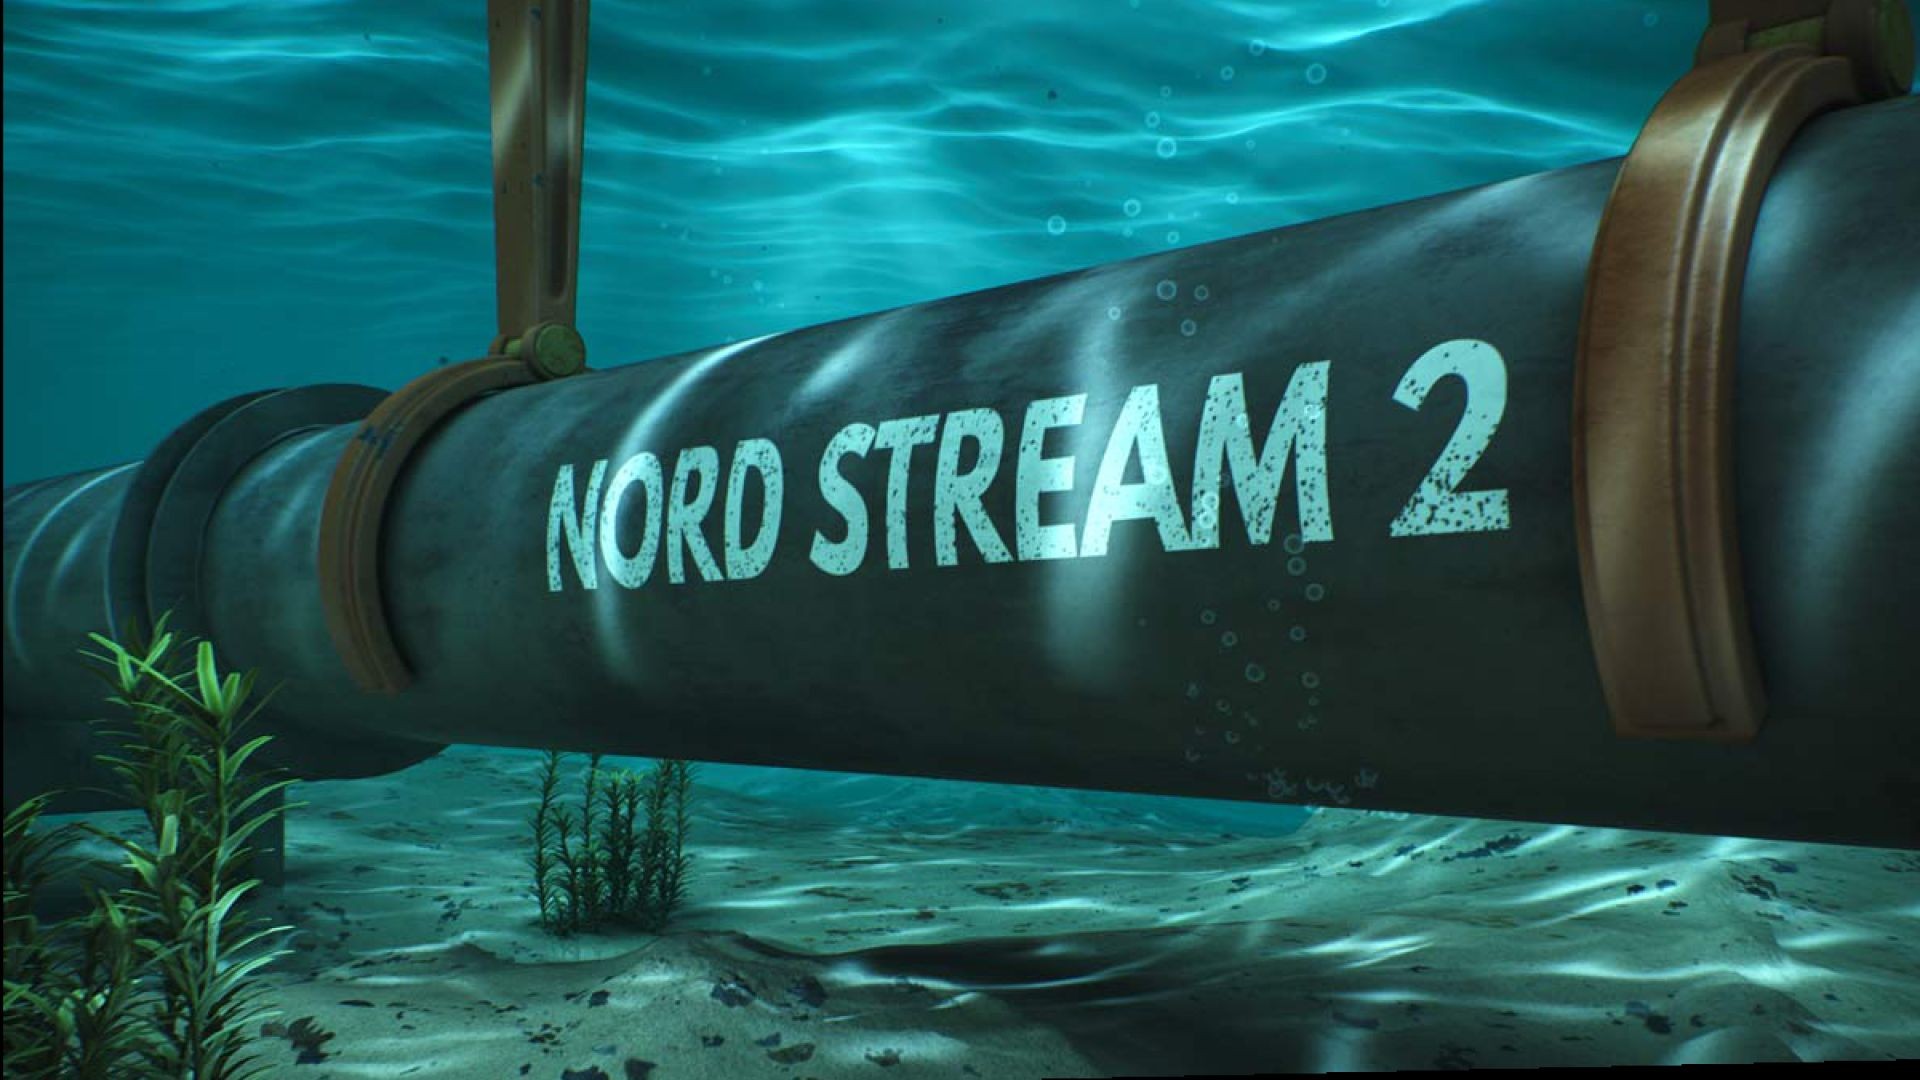 Tiefer Staat - Anschlag auf Nord Stream Pipelines